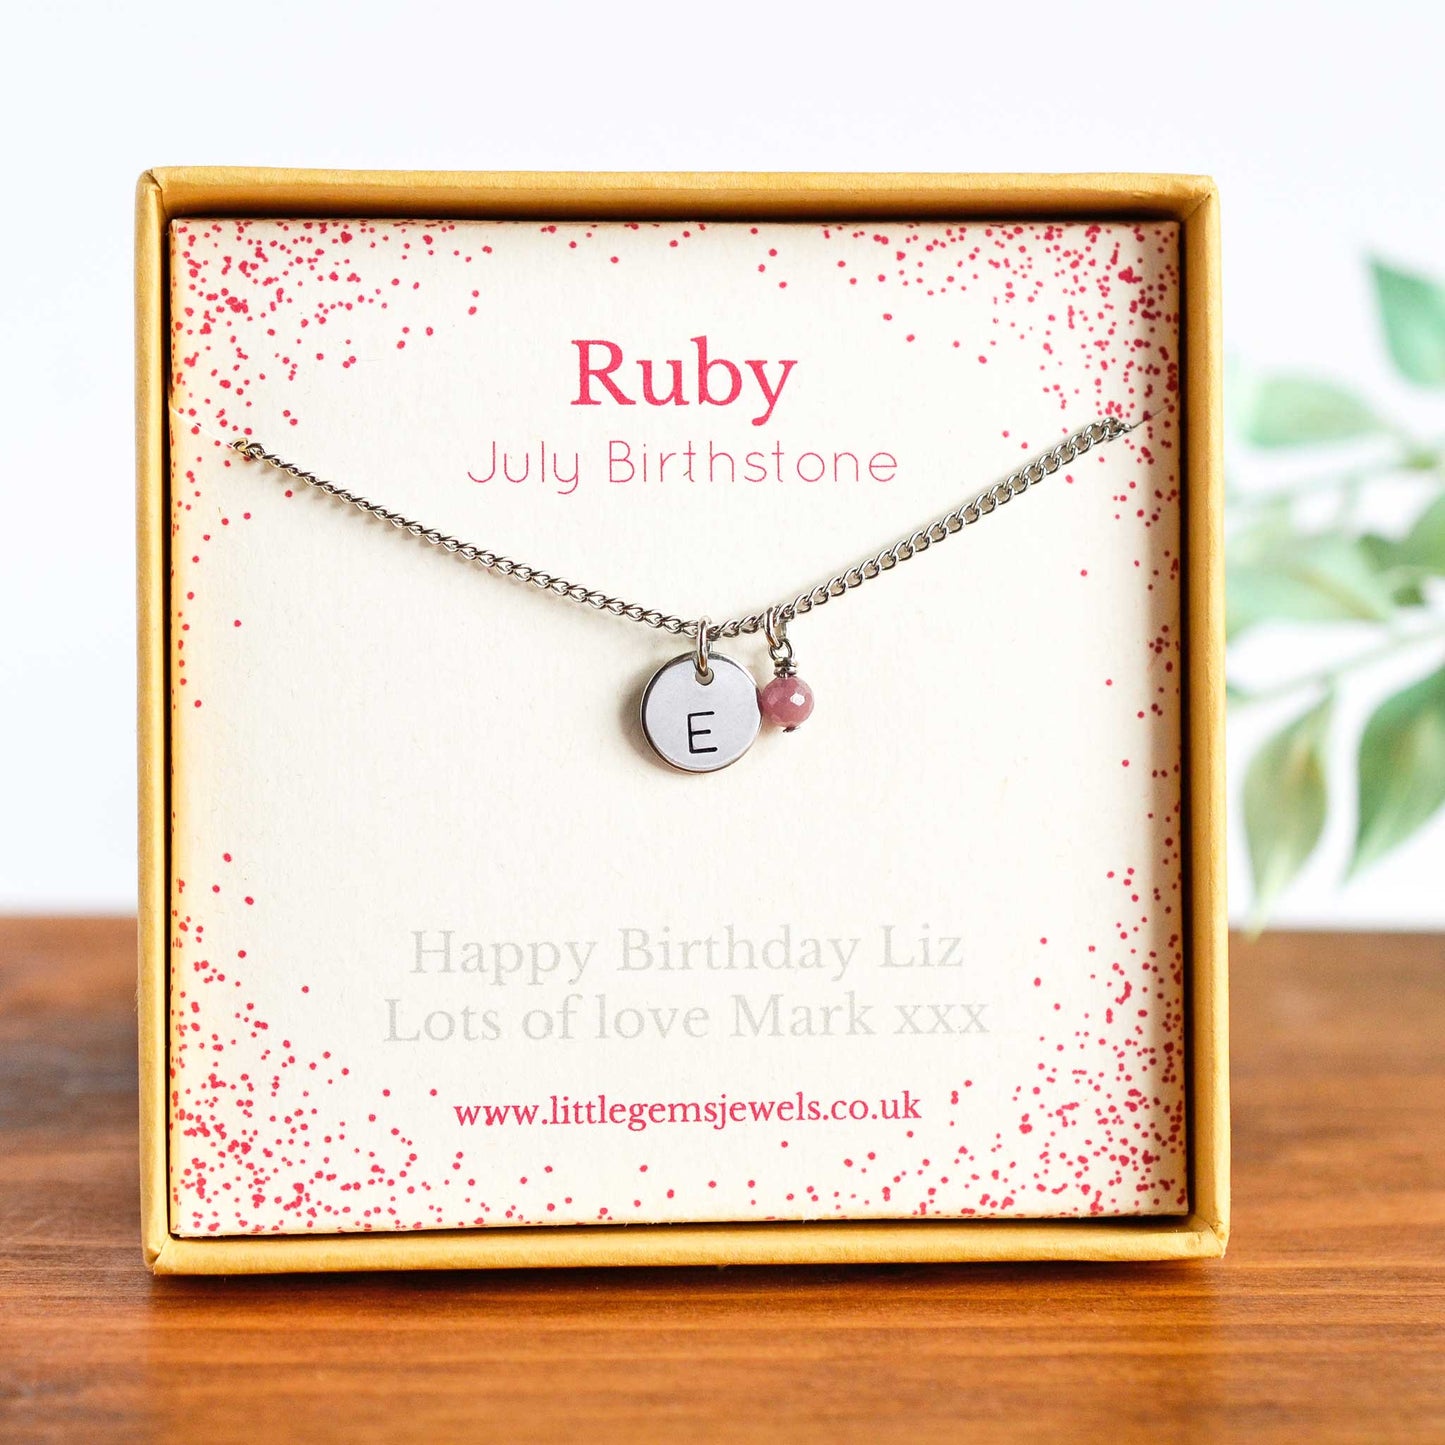 July Birthstone necklace with initial charm & personalised gift message in eco friendly gift box